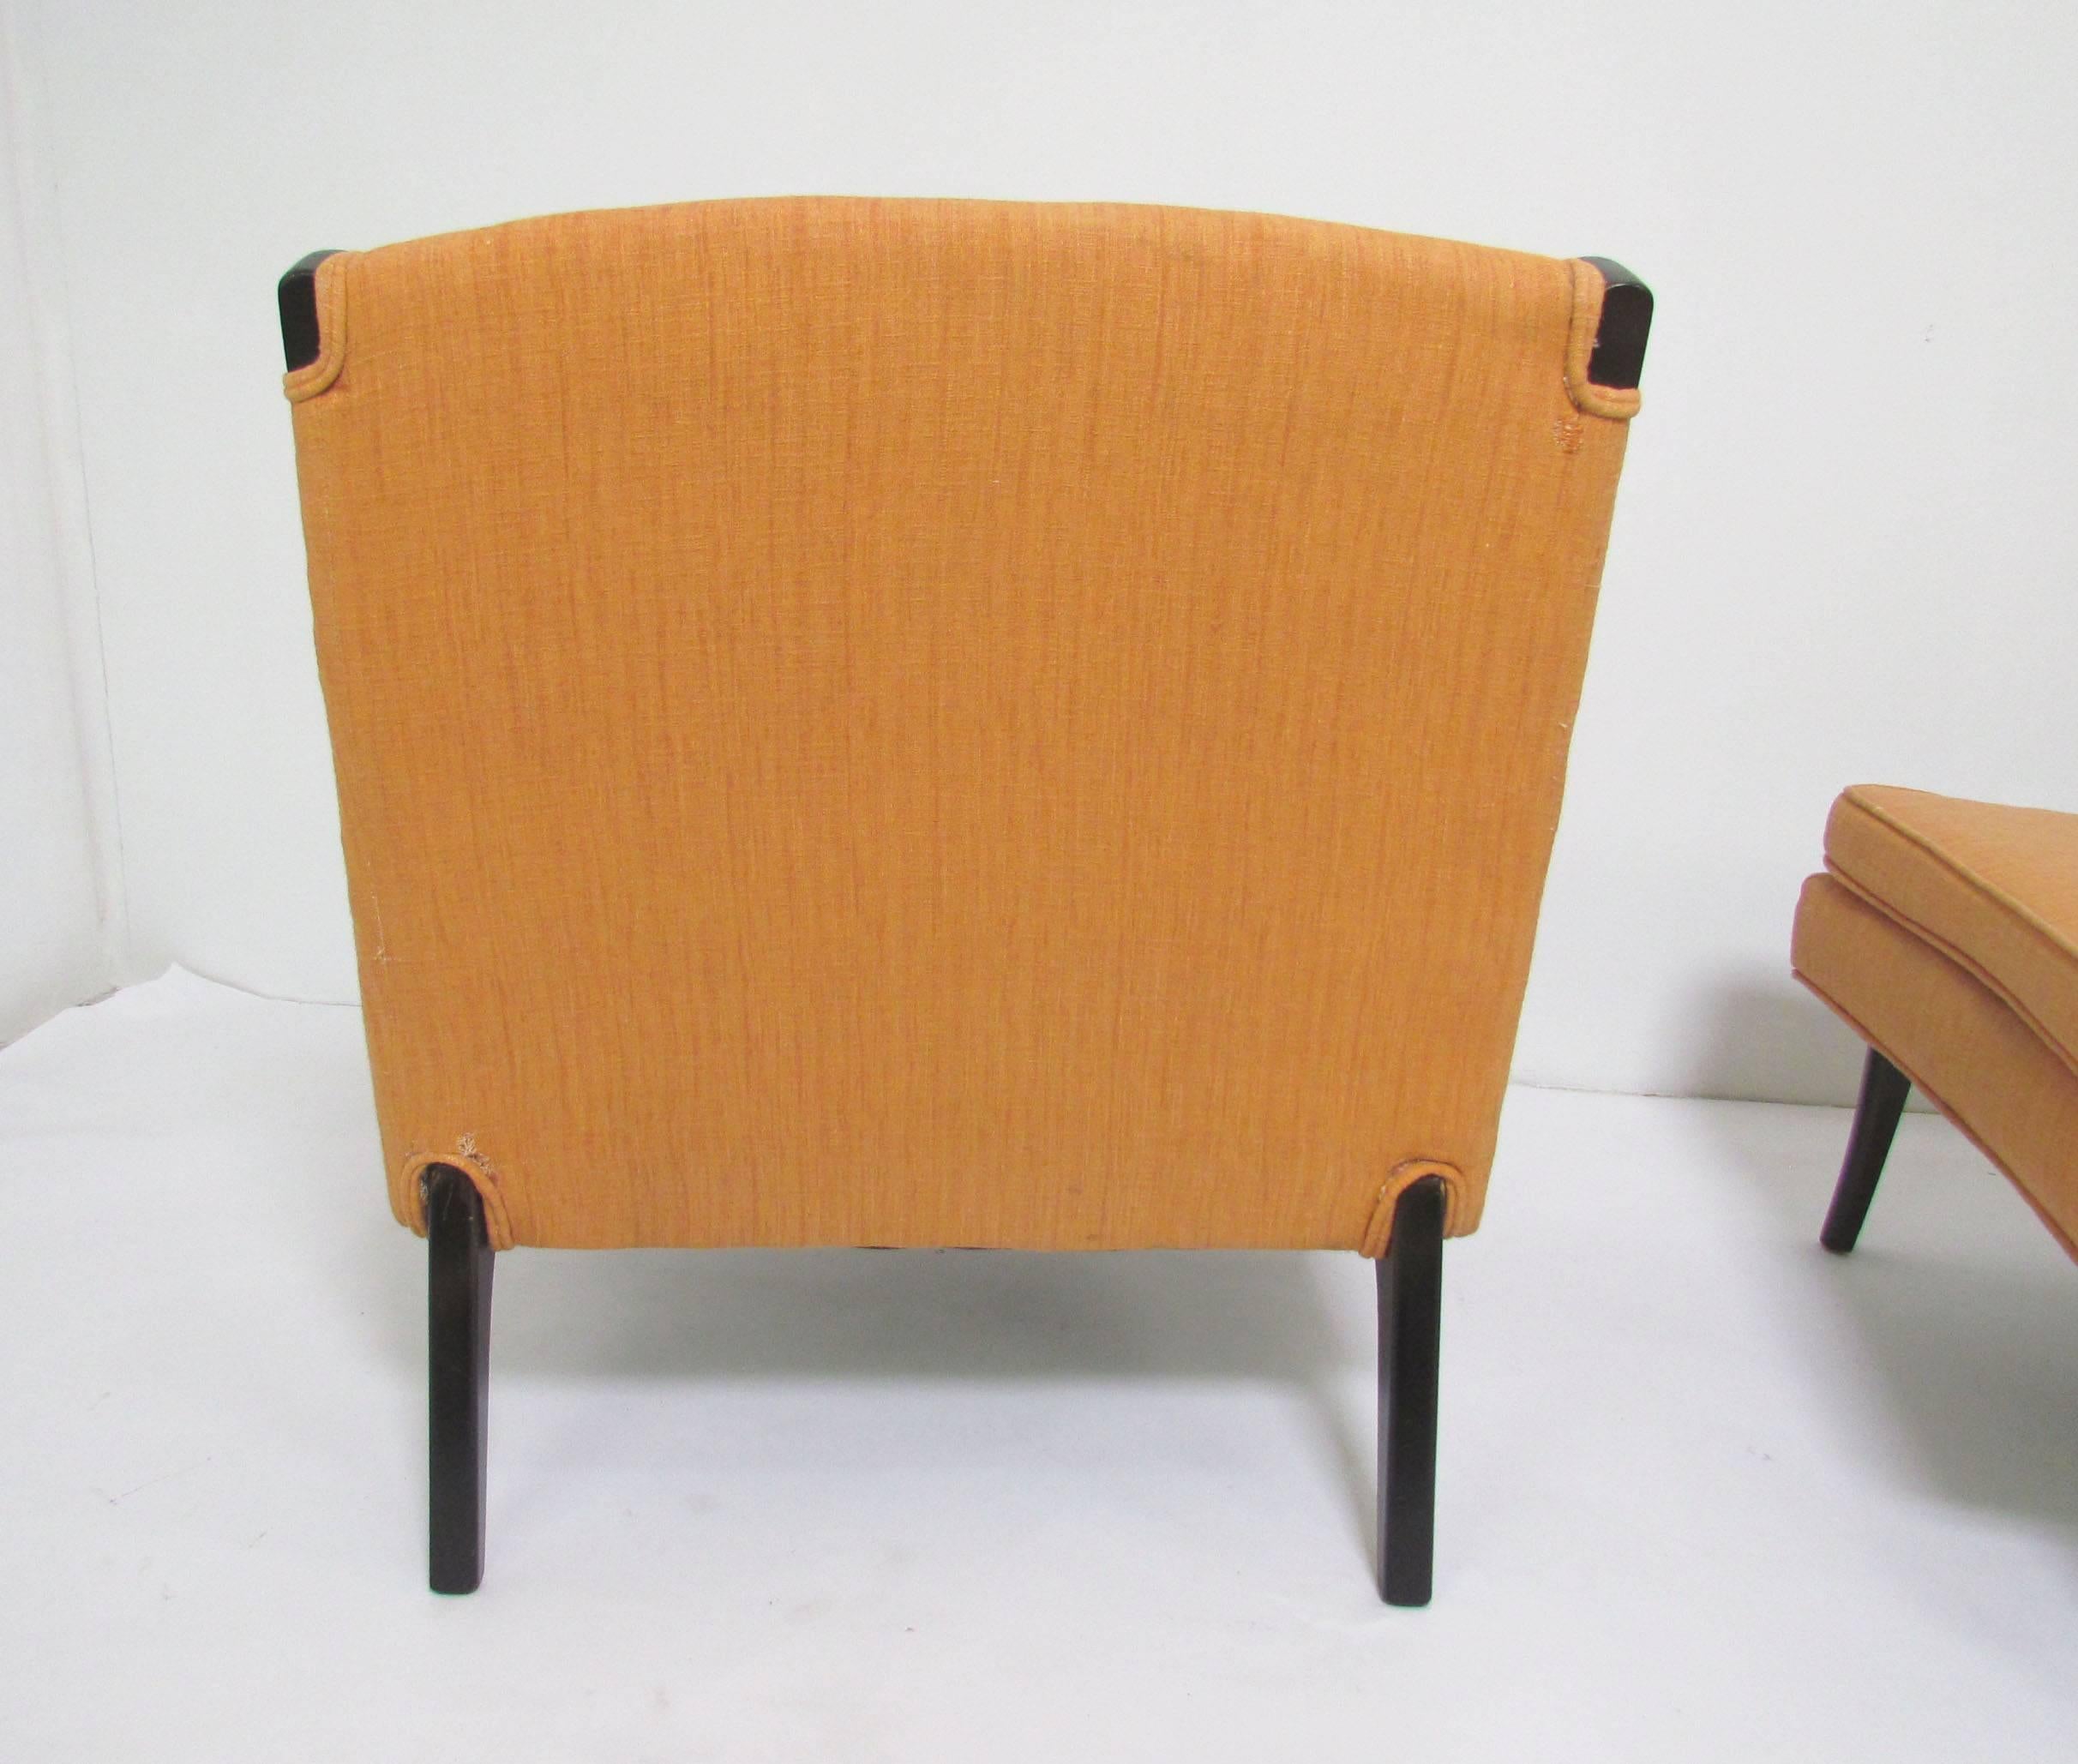 Upholstery Pair of Mid-Century Lounge Chairs in Manner of Harvey Probber, circa 1960s